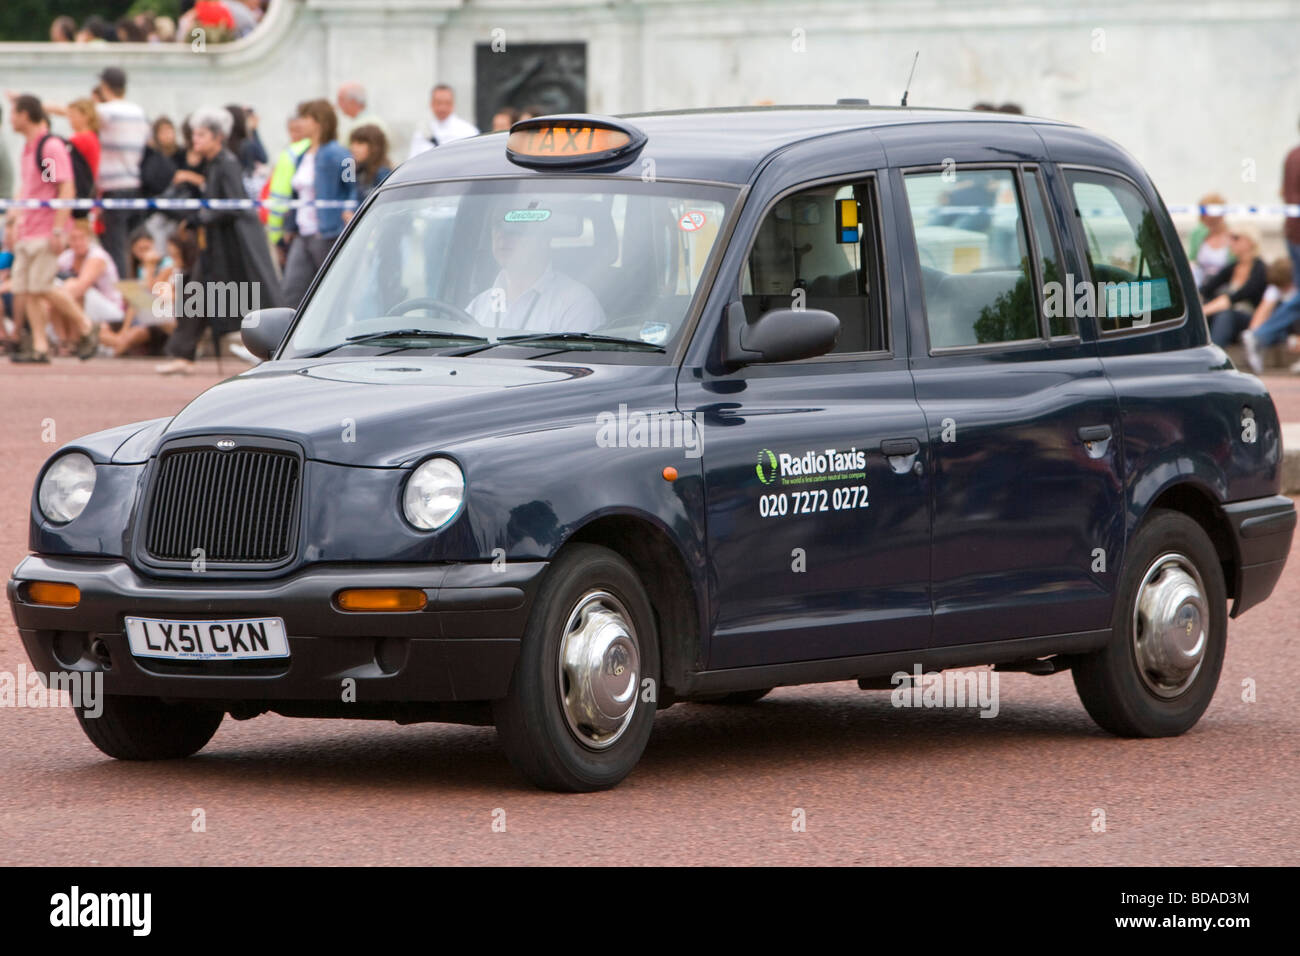 London Black Taxi cab The Mall London England Great Britain Friday July 03 2009 Stock Photo